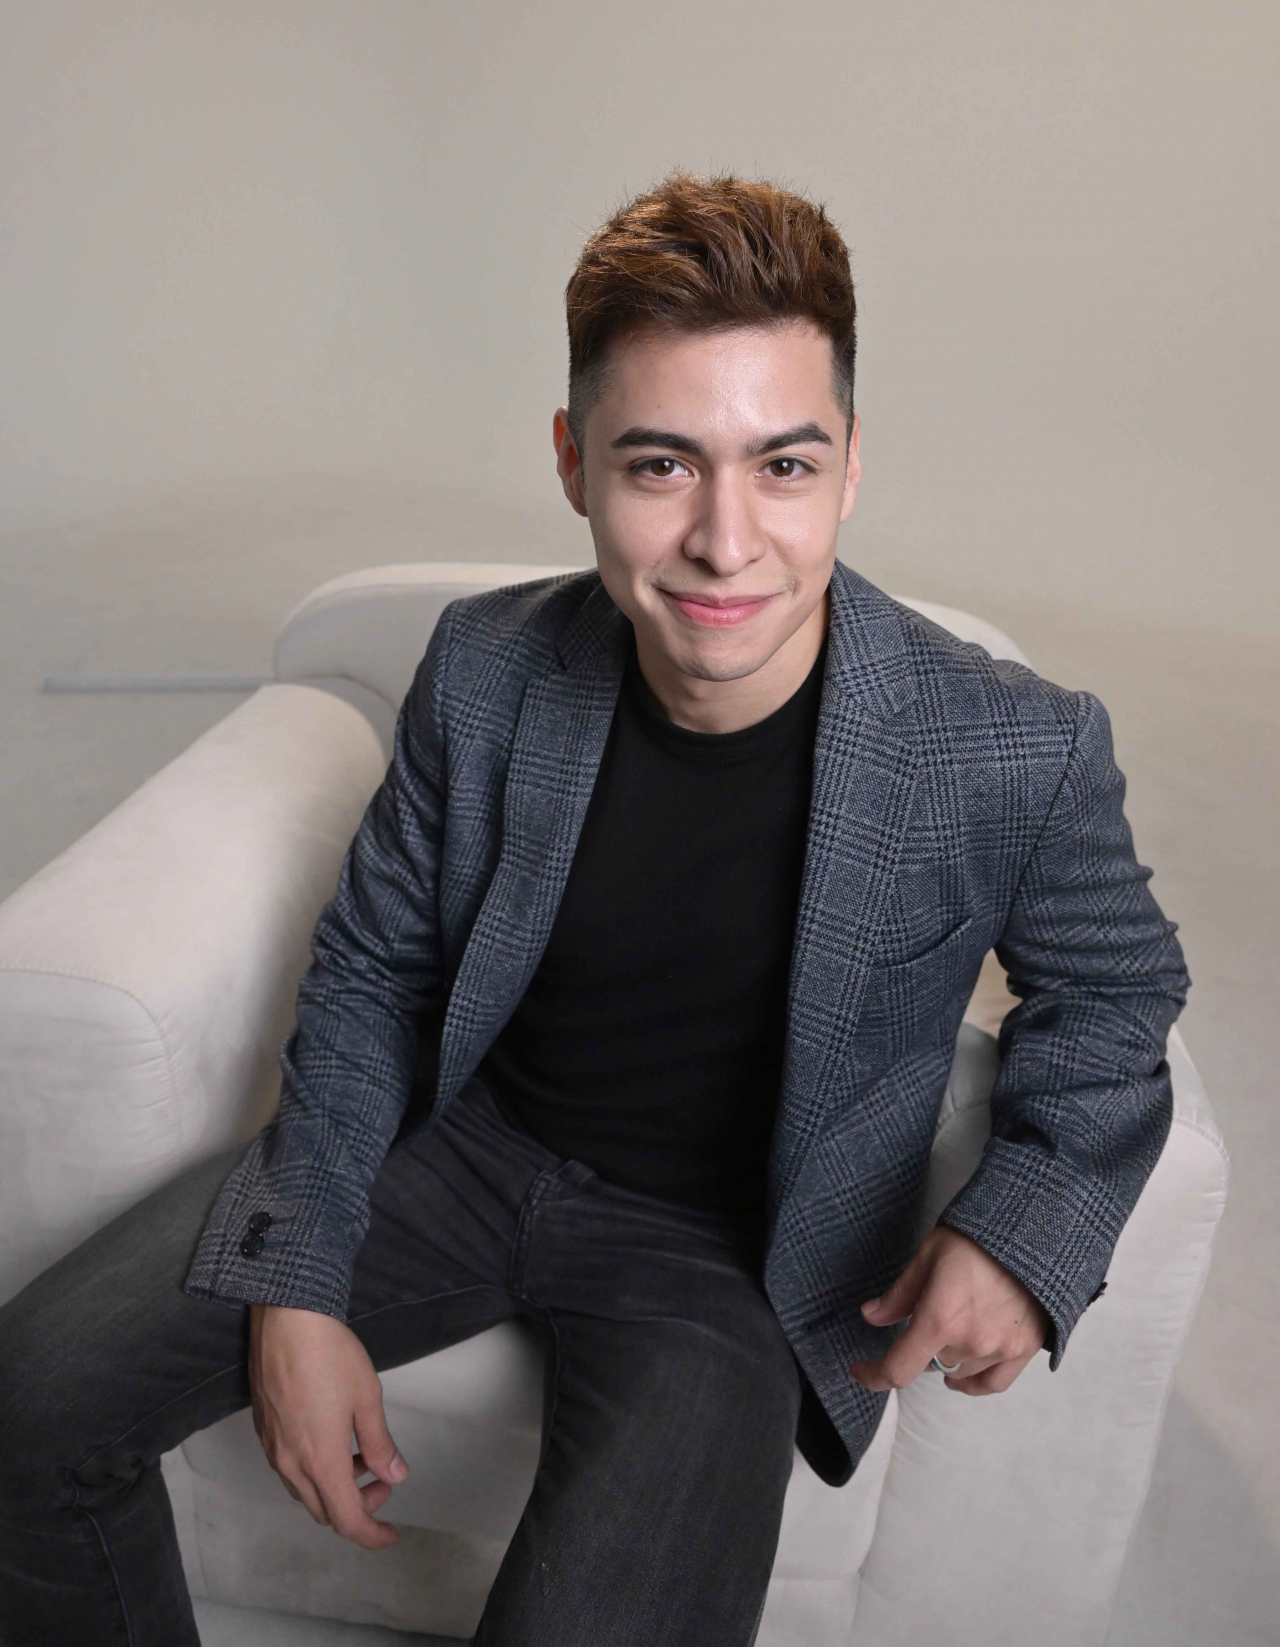 Mexican TV personality Christian Burgos poses for picture during a recent interview with The Korea Herald held at newspaper's headquarters in Seoul. (Lee Sang-sub/The Korea Herald)